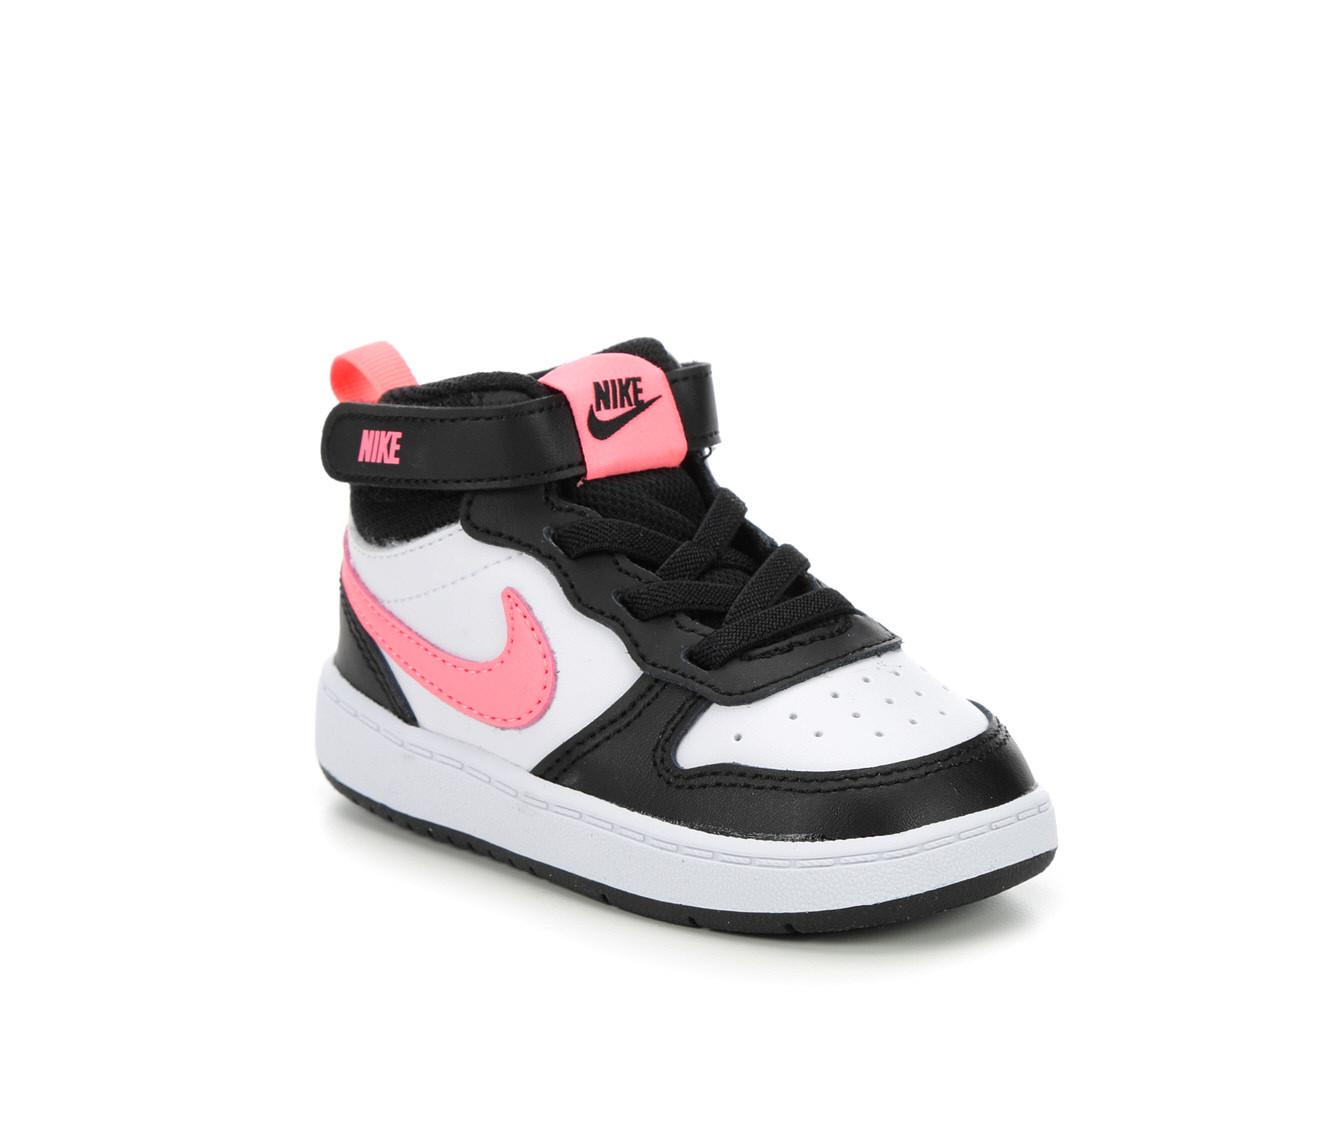 Girls #39 Nike Infant Toddler Court Borough Mid 2 Sneakers Shoe Carnival